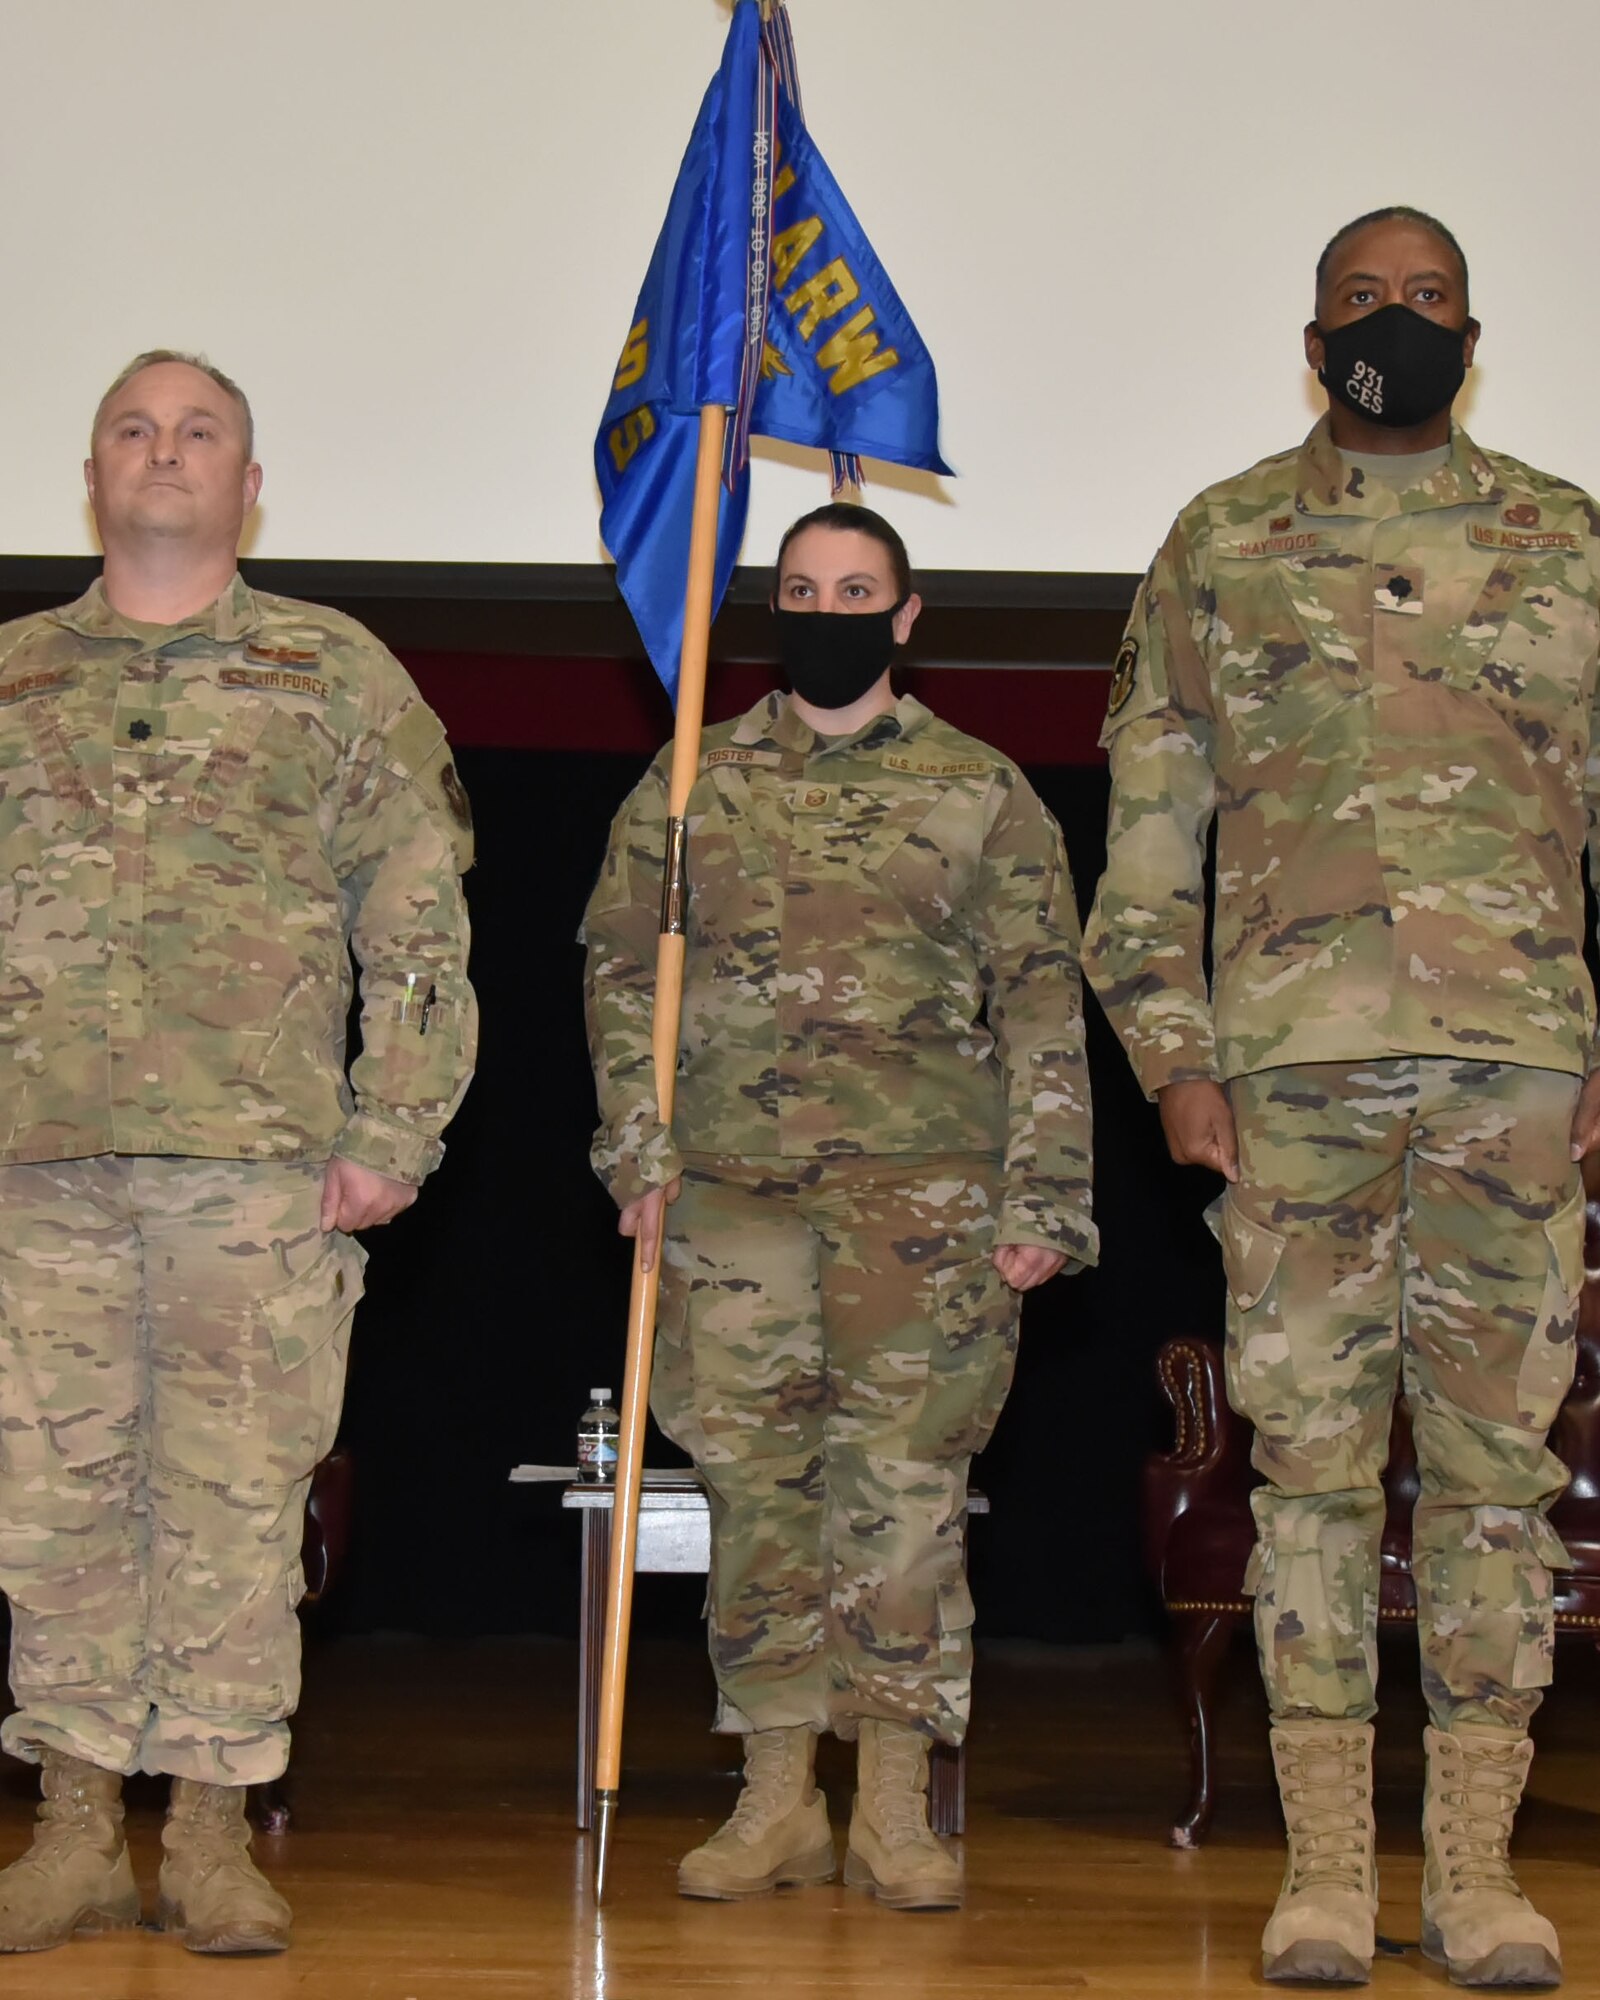 Lt. Col. Kelvin Haywood assumed command of the 931st Civil Engineer Squadron during an official ceremony March 5, 2021, at McConnell Air Force Base, Kansas.